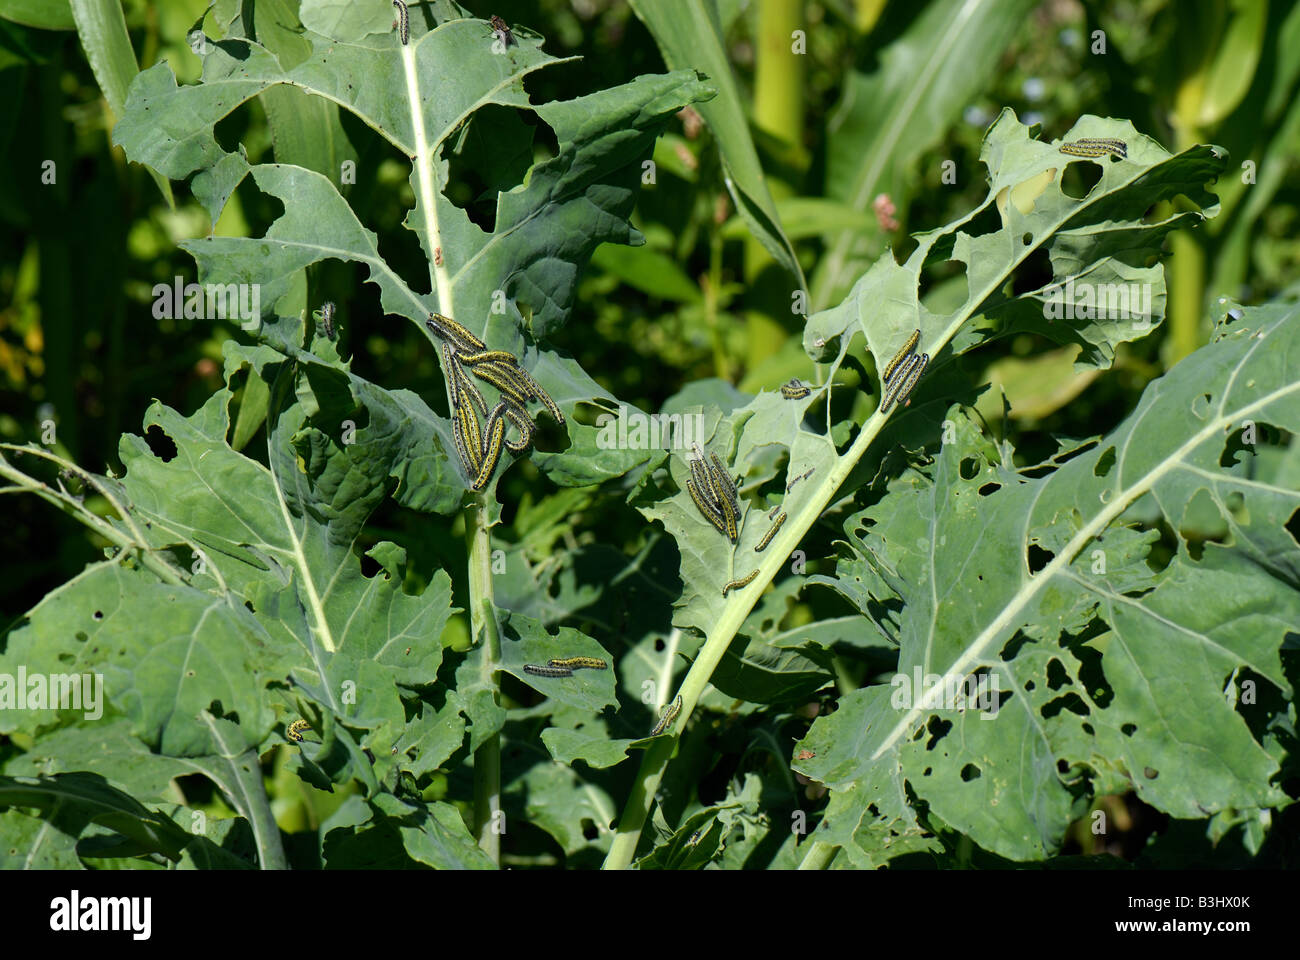 Caterpillars of a large white butterfly Pieris brassicae on severely damaged cabbage leaves Stock Photo